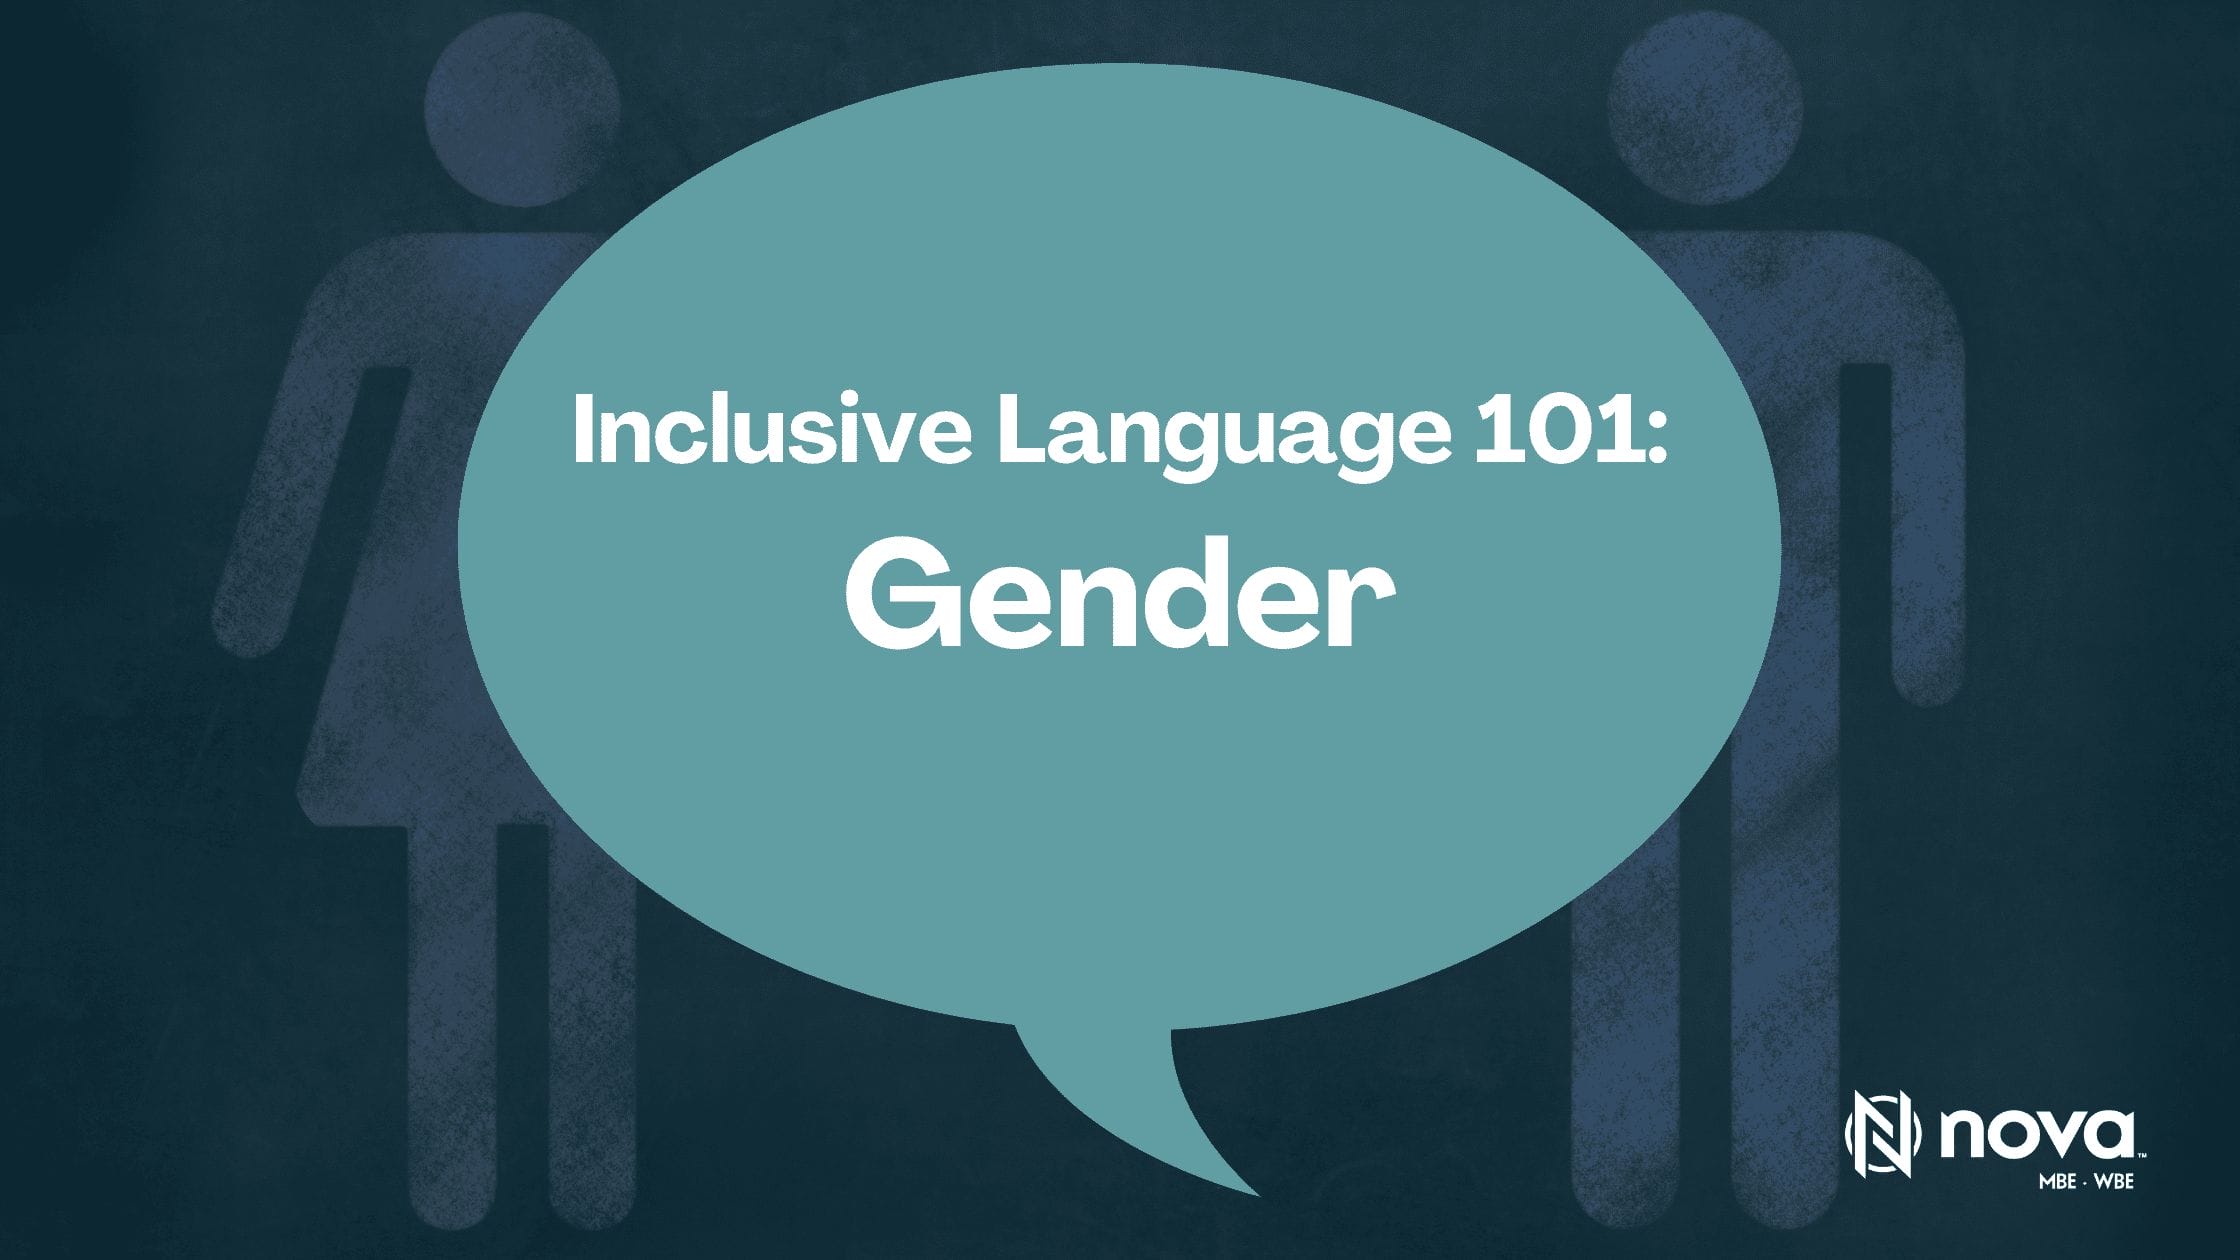 Gender Inclusive Language for the workplace - The Nova Collective